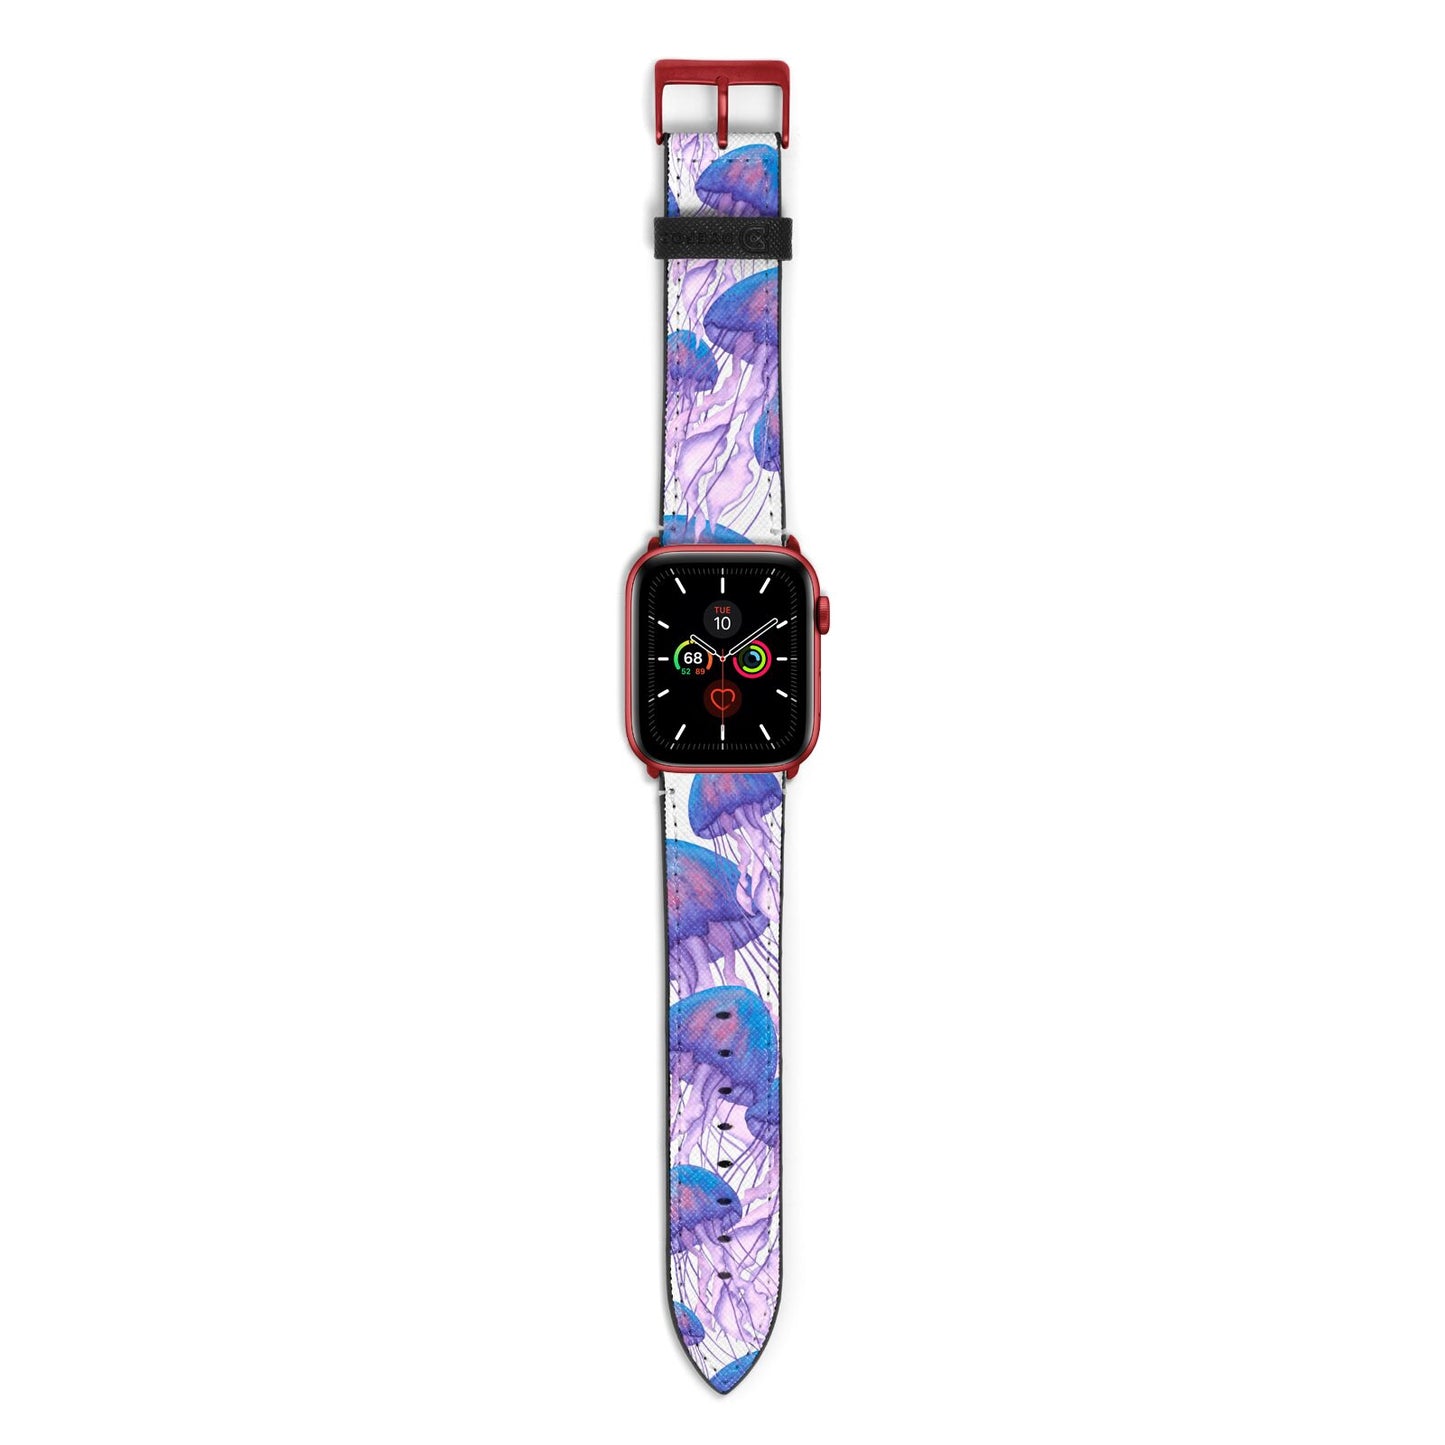 Jellyfish Apple Watch Strap with Red Hardware